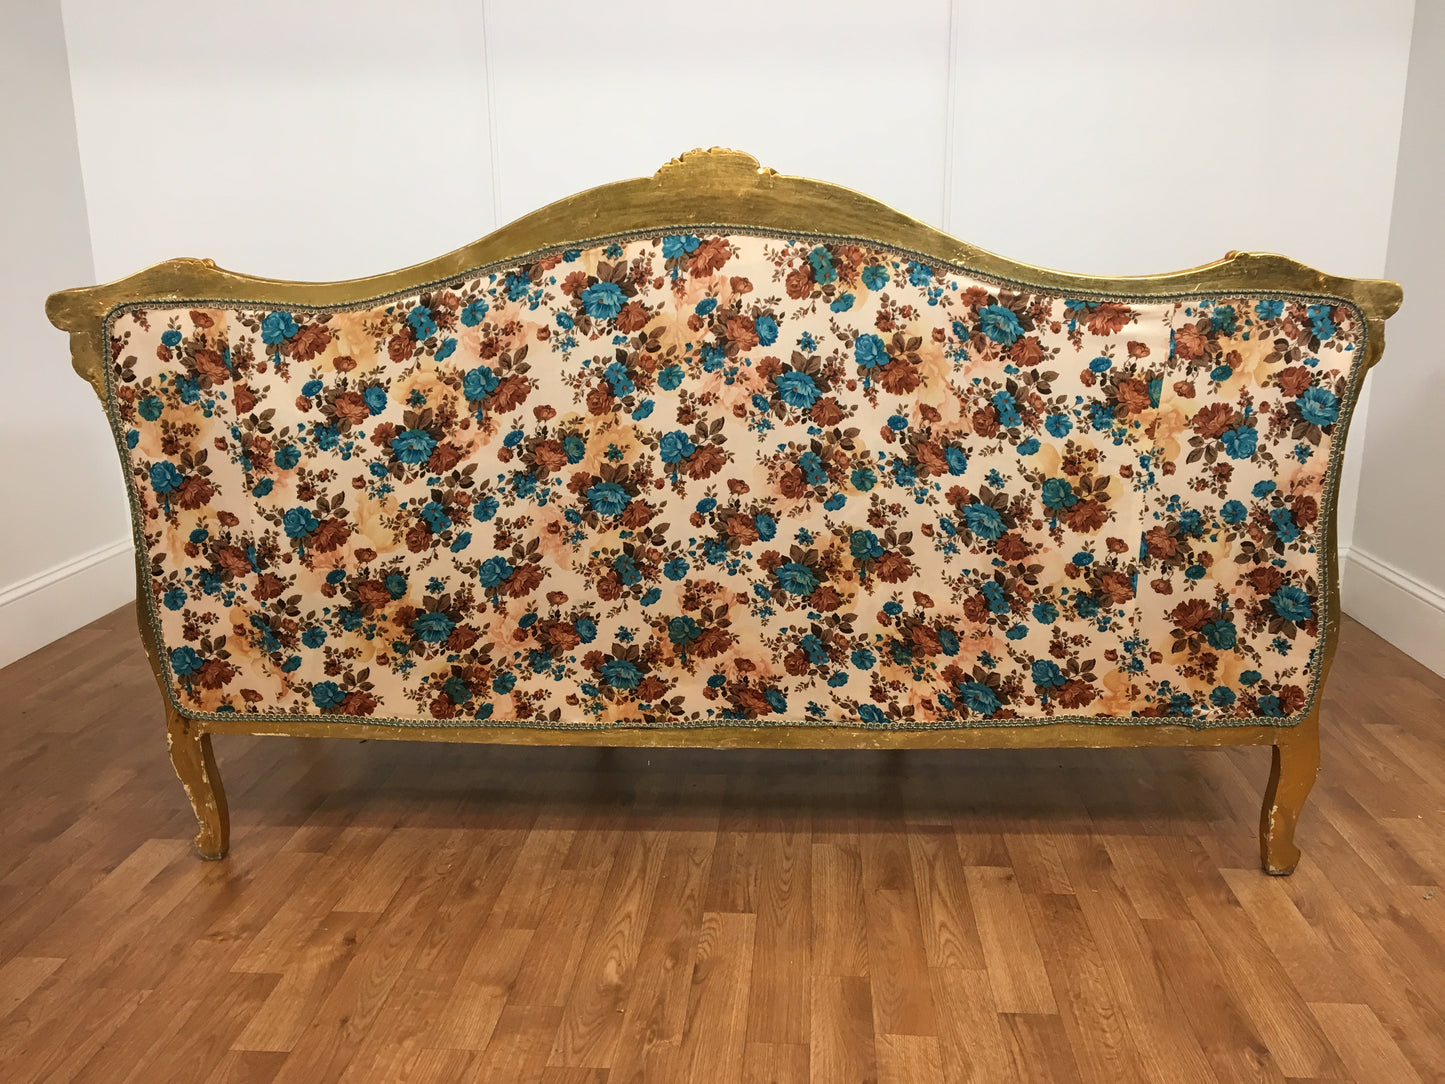 CLOTH FLORAL PATTERN COUCH